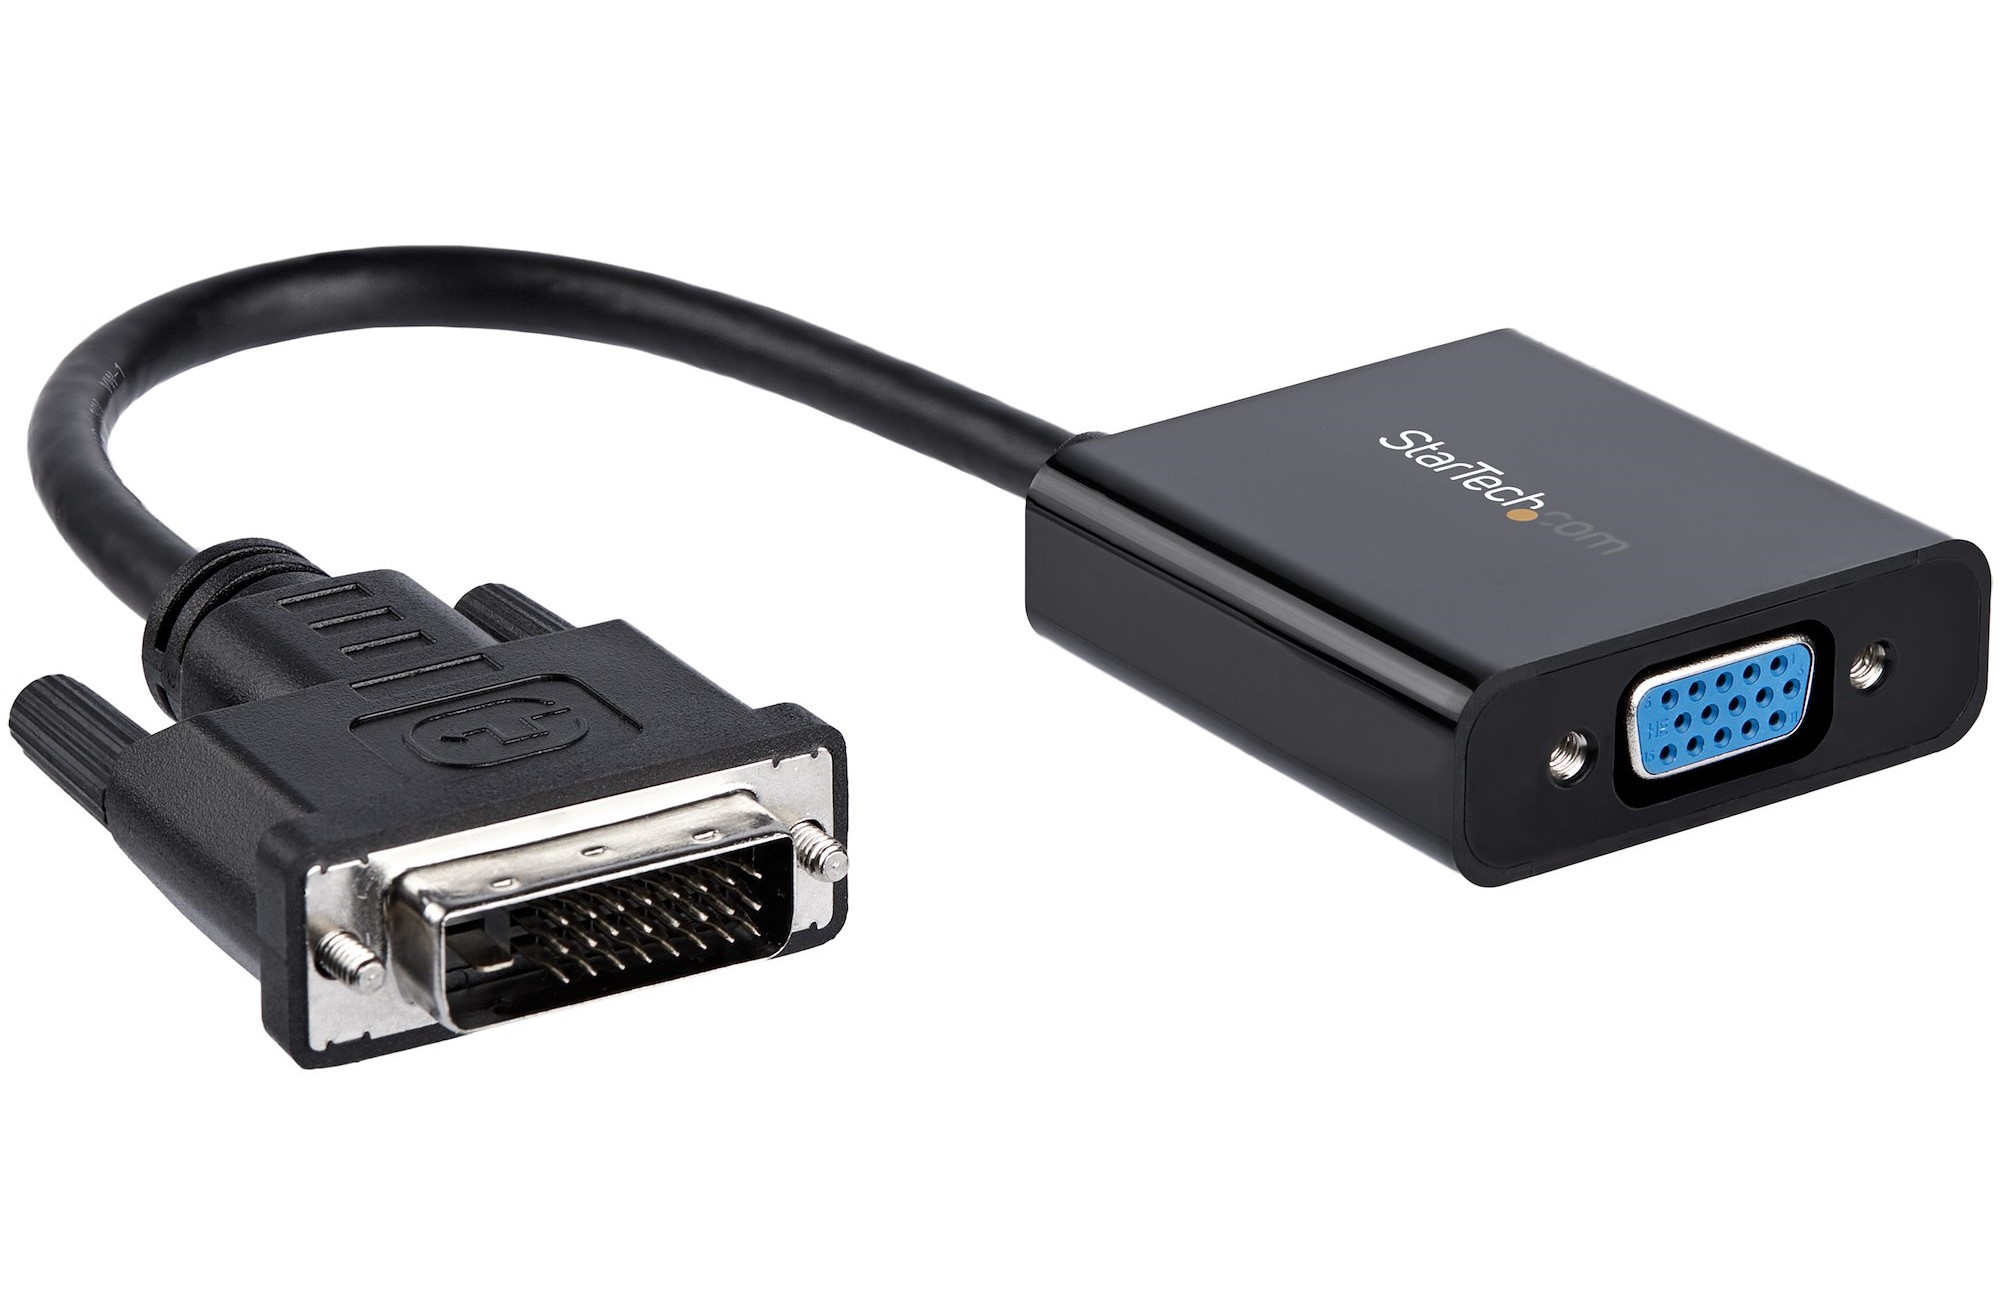 13 Incredible Dvi To Vga Cable Adapter for 2023